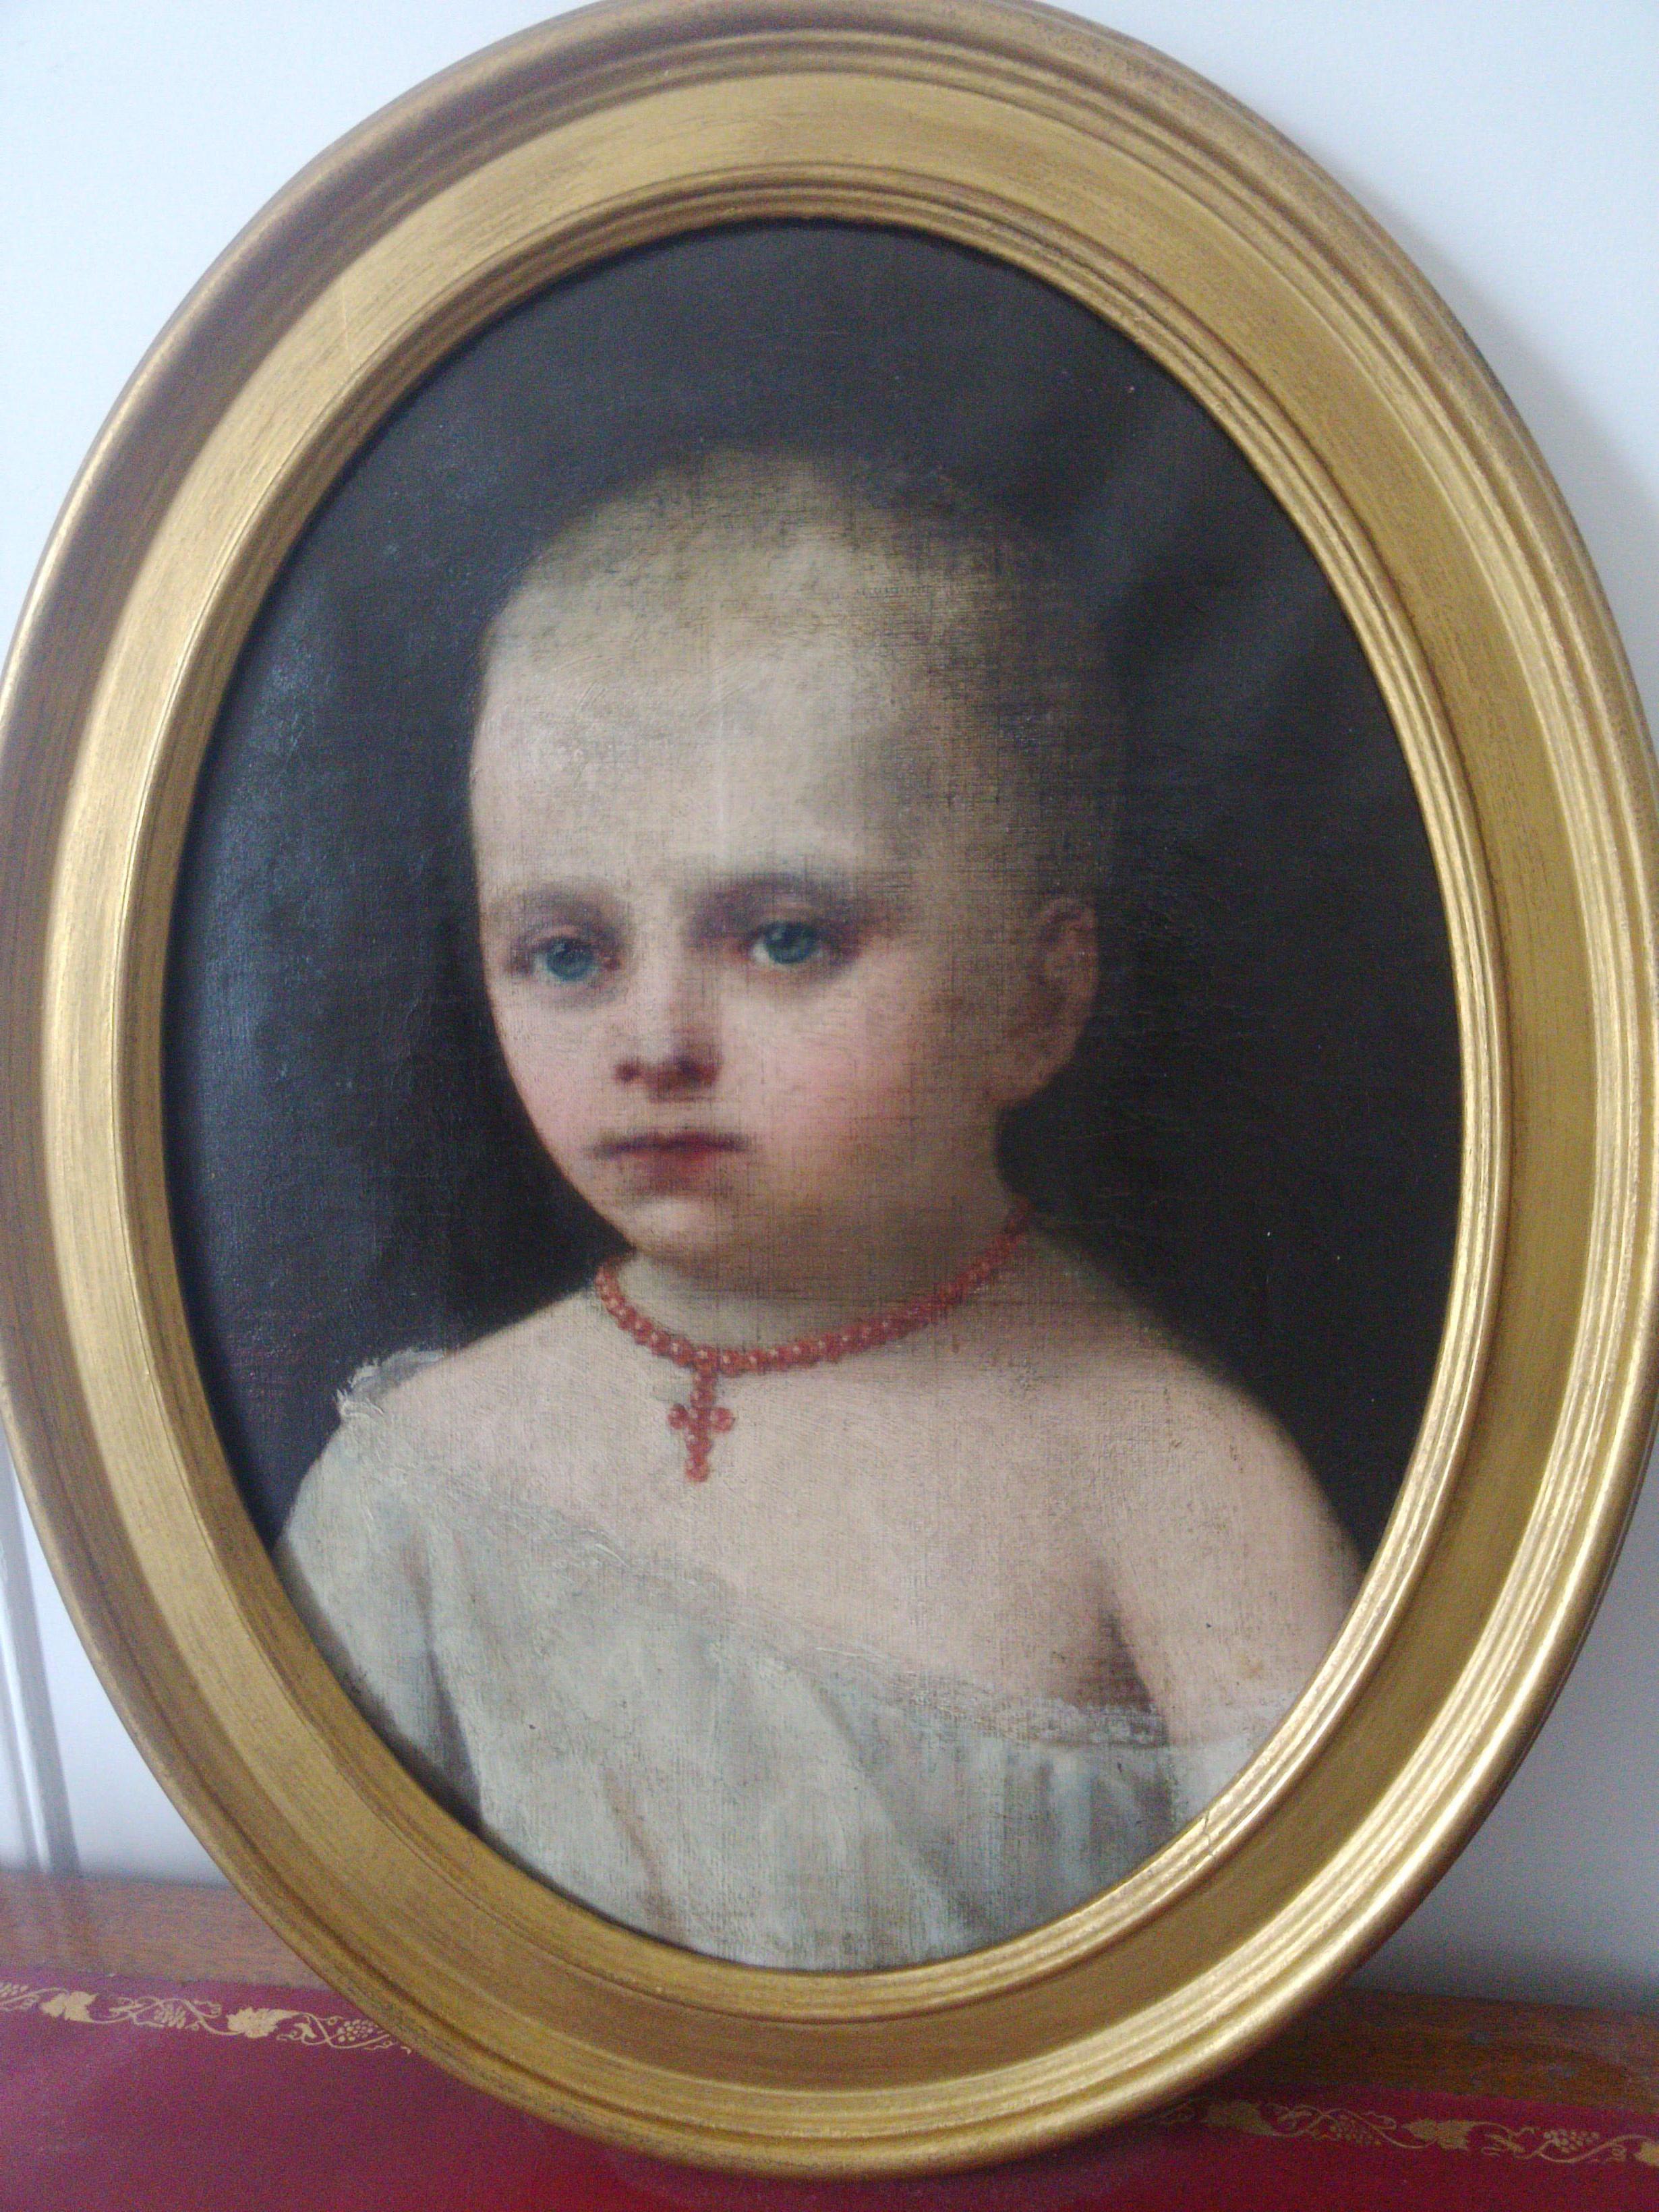 Young child 19th century baby portrait by French portraitist of Brazilian royals - Painting by Edouard Vienot